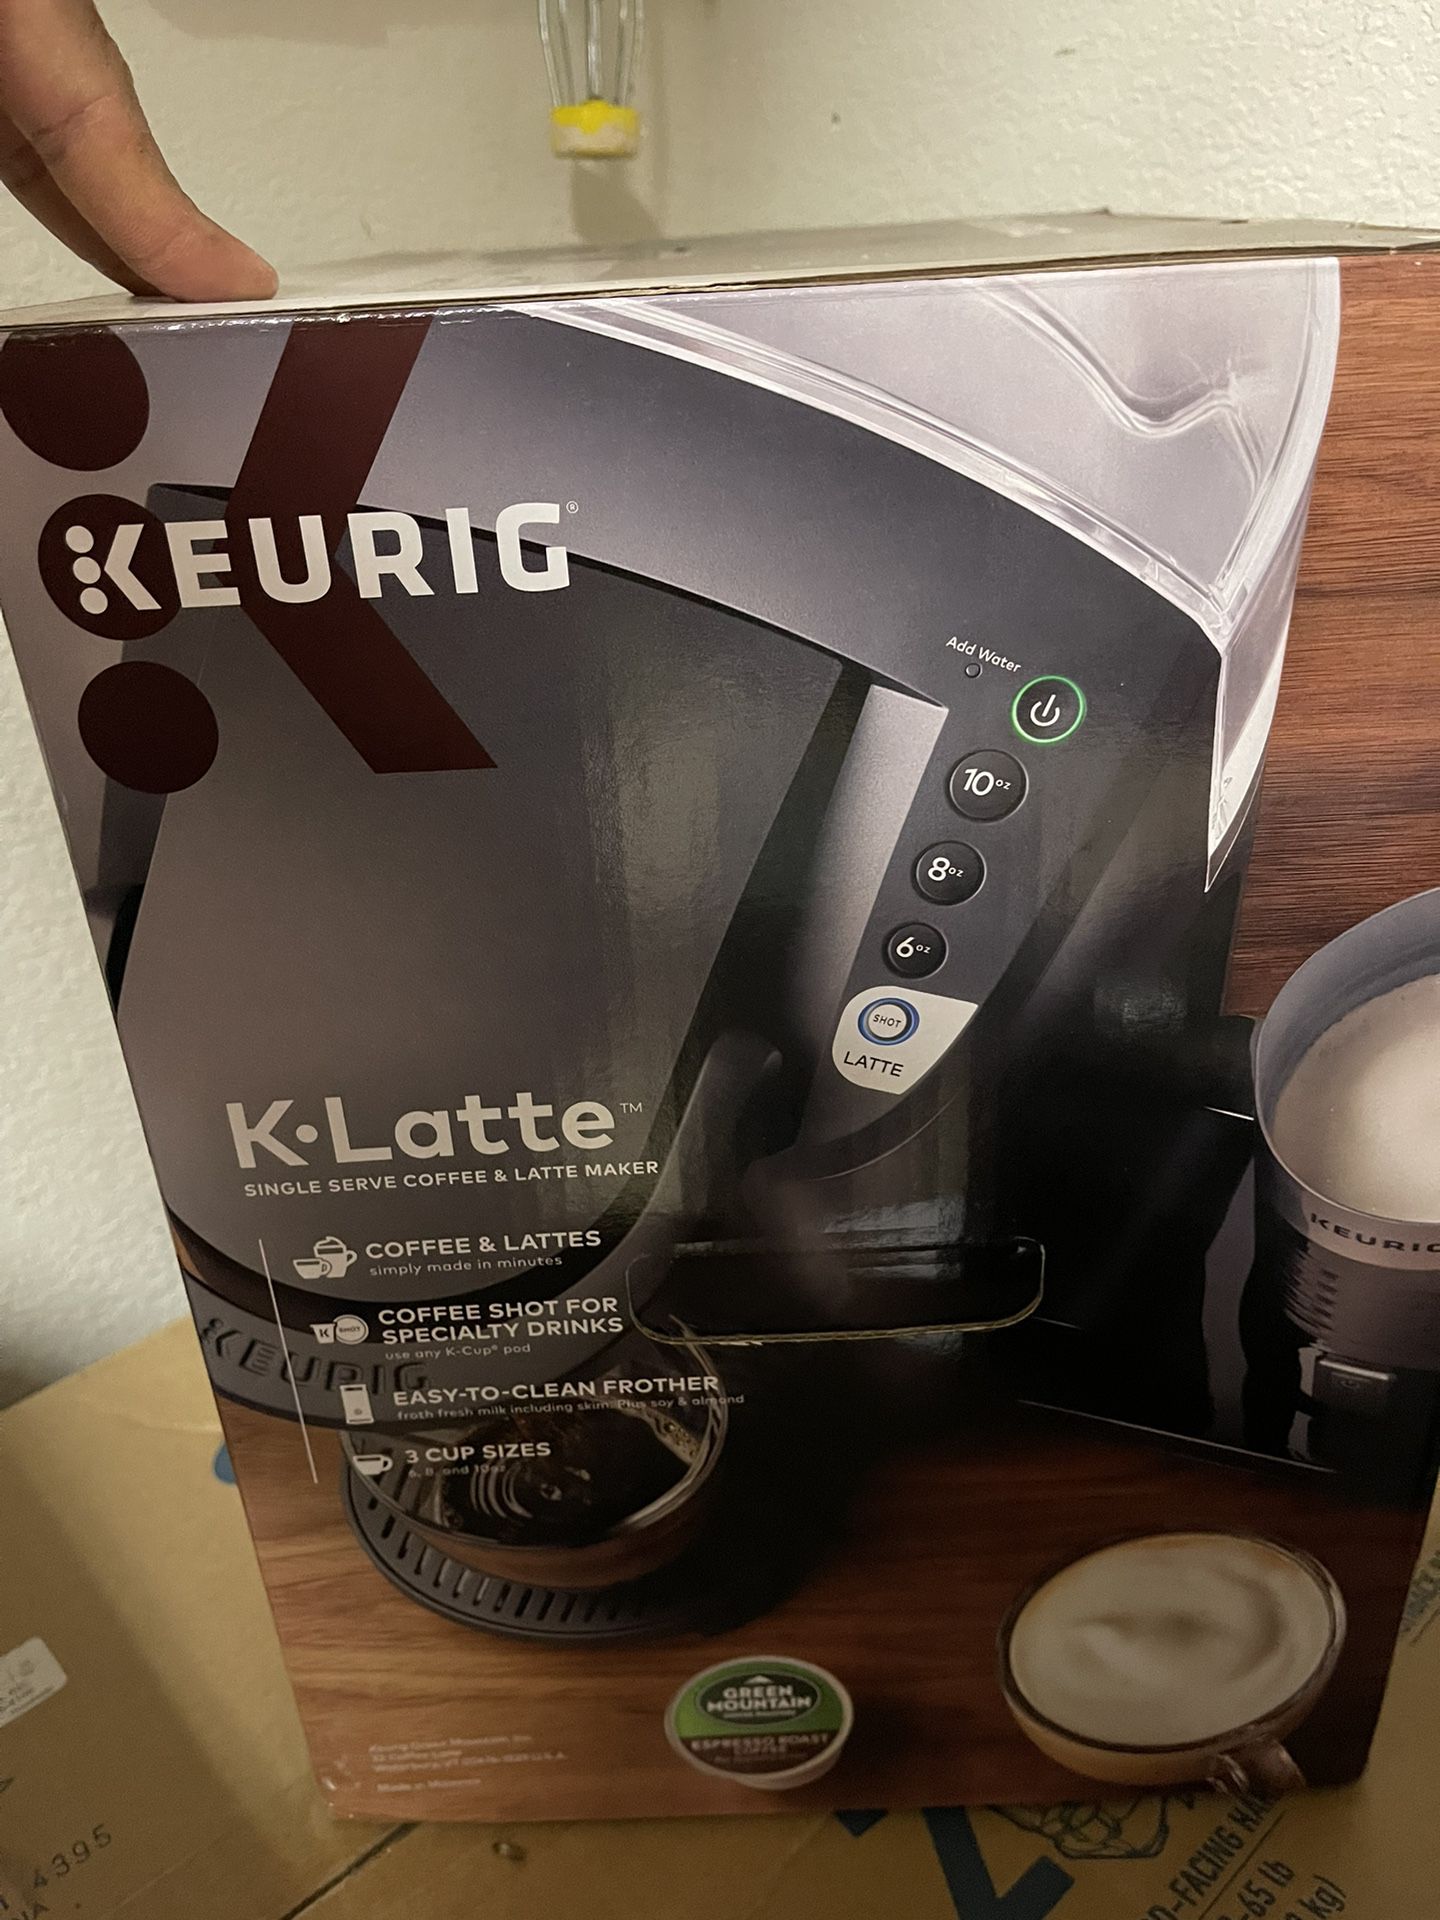 Brand New - Keurig K-Latte Single Serve K-Cup Coffee and Latte Maker, Comes with Milk Frother, Compatible With all Keurig K-Cup Pods, Matte Black